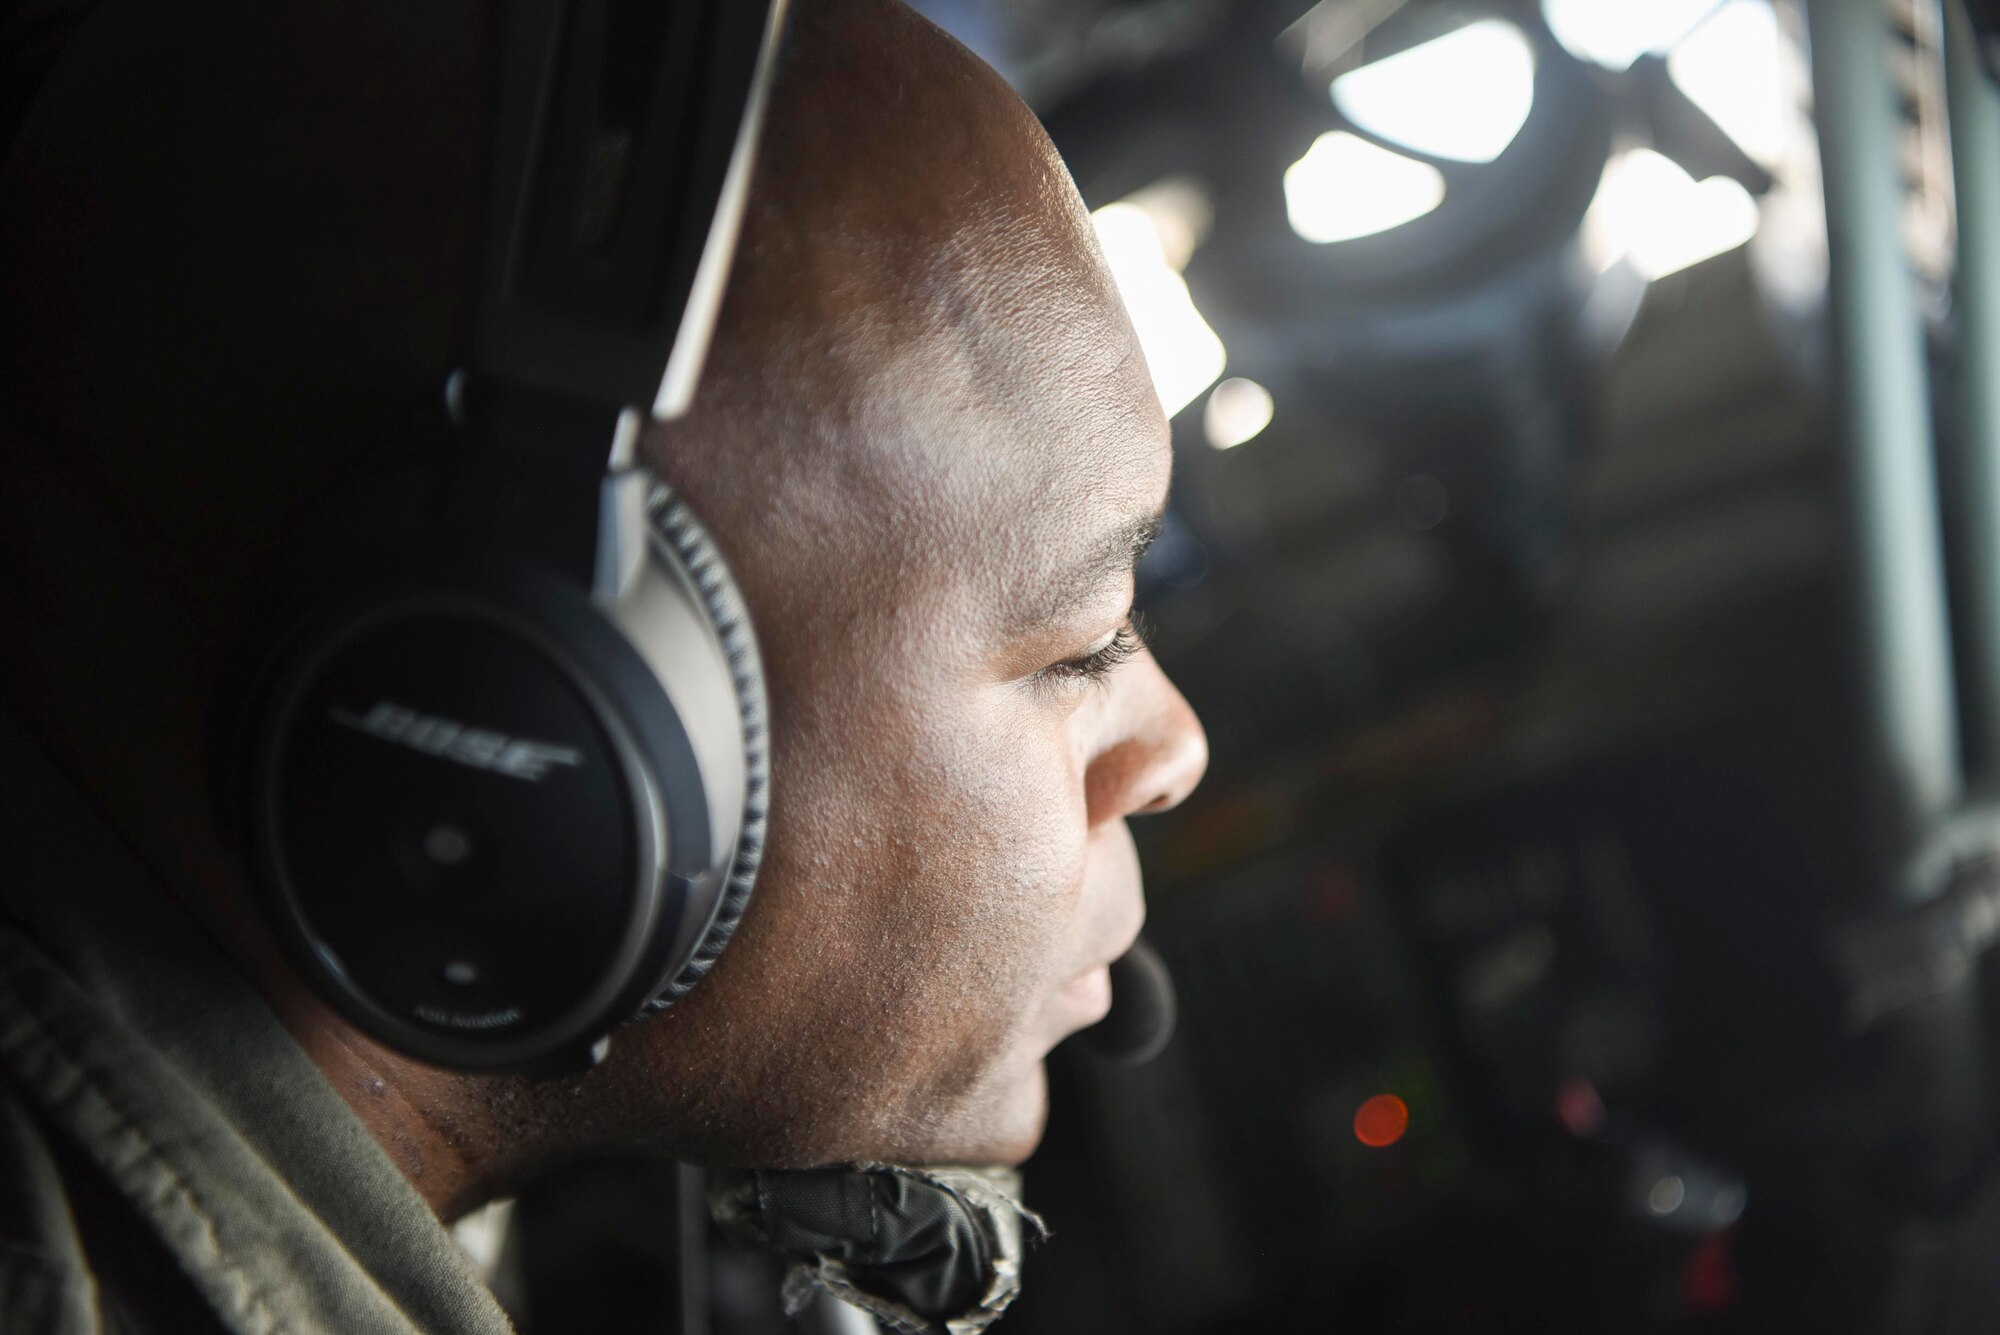 U.S. Air Force Master Sgt. Mark Smith, 100th Operations Support Squadron boom operator, communicates with the aircrew of an approaching B-1B Lancer aircraft assigned to the 7th Bomb Wing, Dyess Air Force Base, Texas, prior to delivering fuel during a Bomber Task Force mission over the North Sea, March 3, 2021. The wing’s air refueling capabilities support U.S. strategic bombers in responding to changes in the operational environment. (U.S. Air Force photo by Senior Airman Joseph Barron)